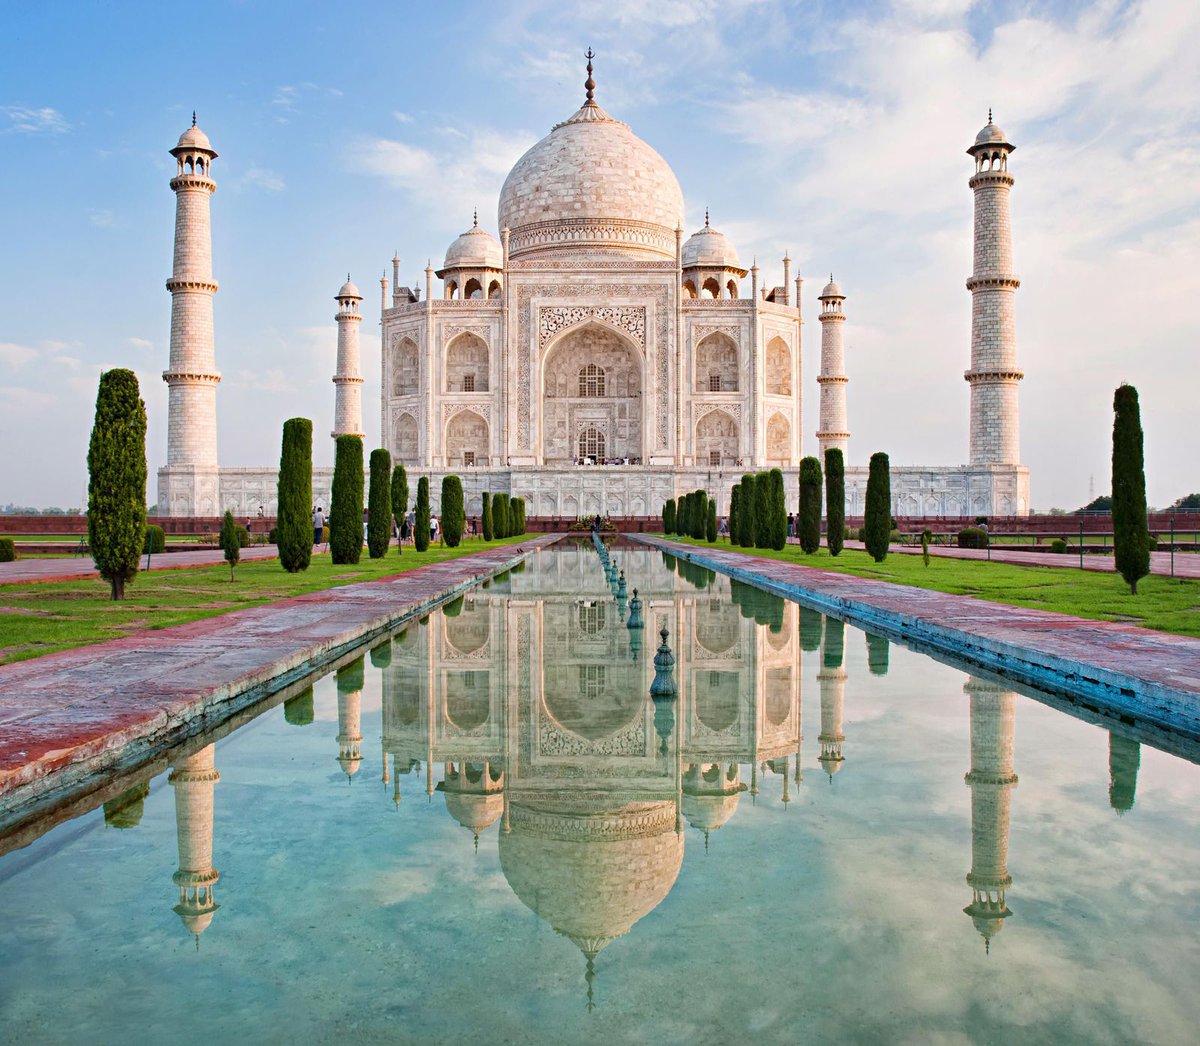 Tae As Taj Mahal, India: Considered one of the most stunning piece of art, the white marble structure represents a blend of architectural styles, including Persian, Turkish and Indian. An enduring symbol of love just like our Tae is for BTS and ARMY!   #BTSARMY  @BTS_twt